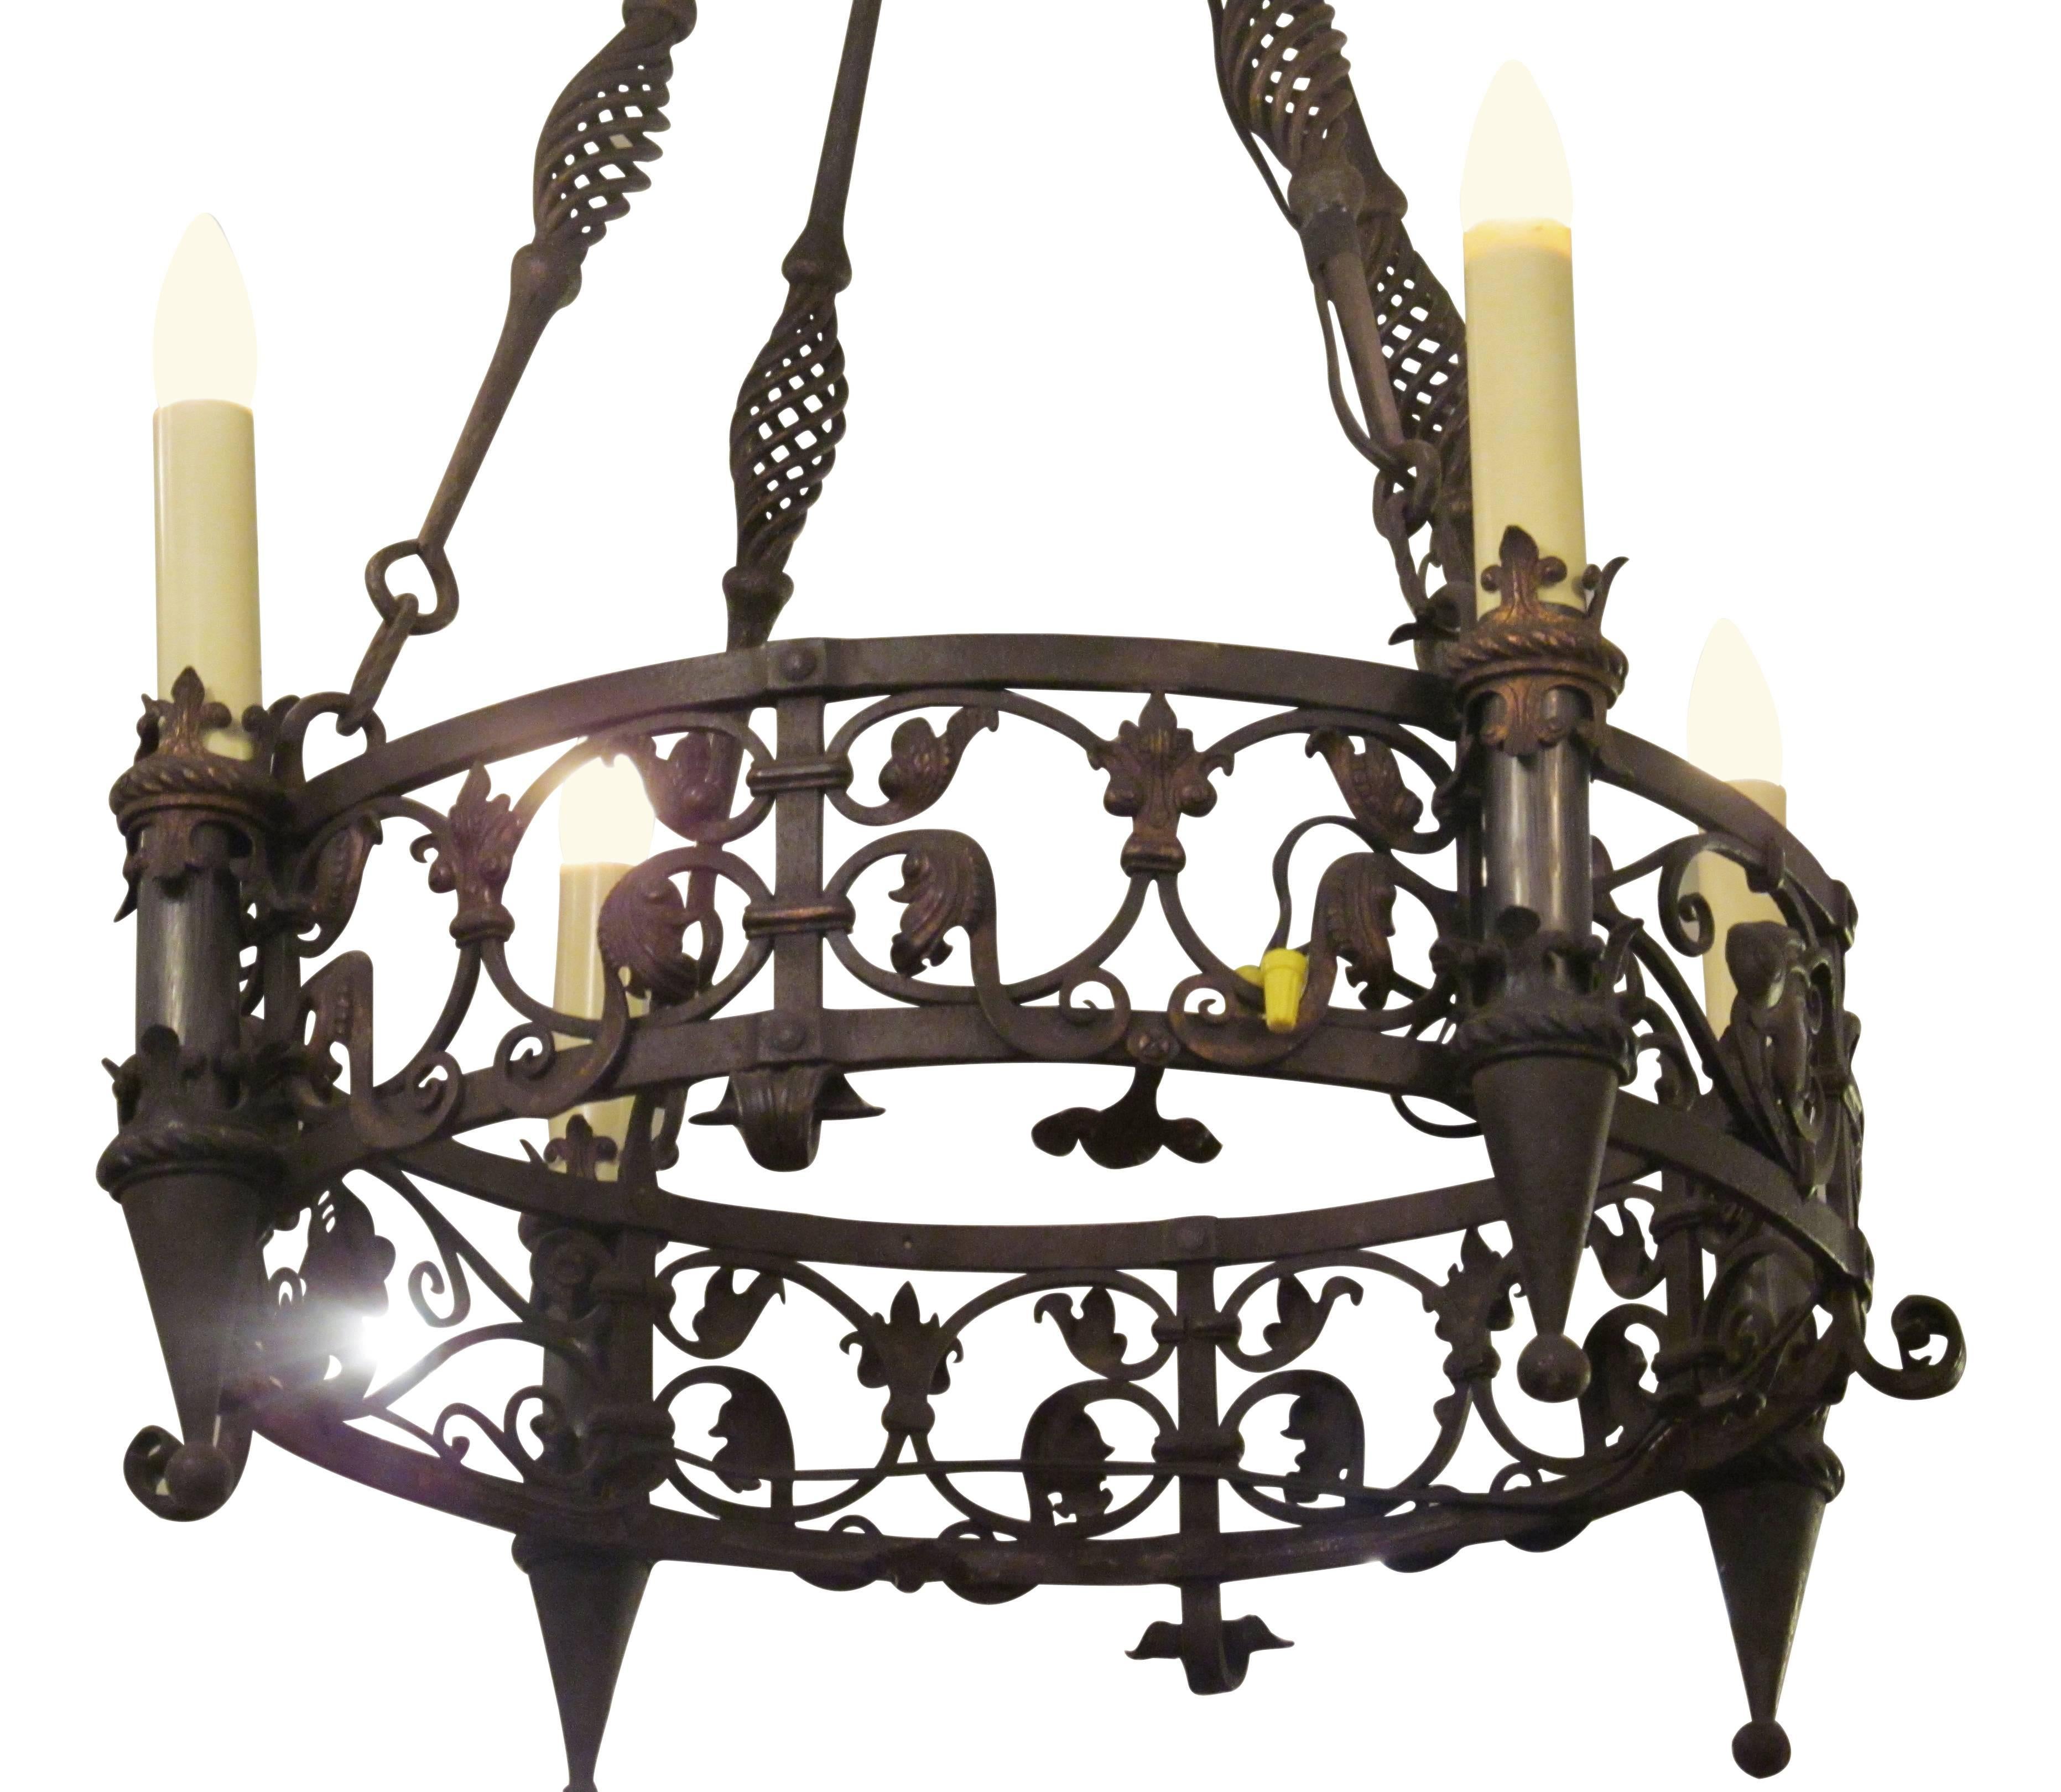 1920s wrought iron four-light chandelier with spirals and hand tooled designs. This can be seen at our 2420 Broadway location on the upper west side in Manhattan.